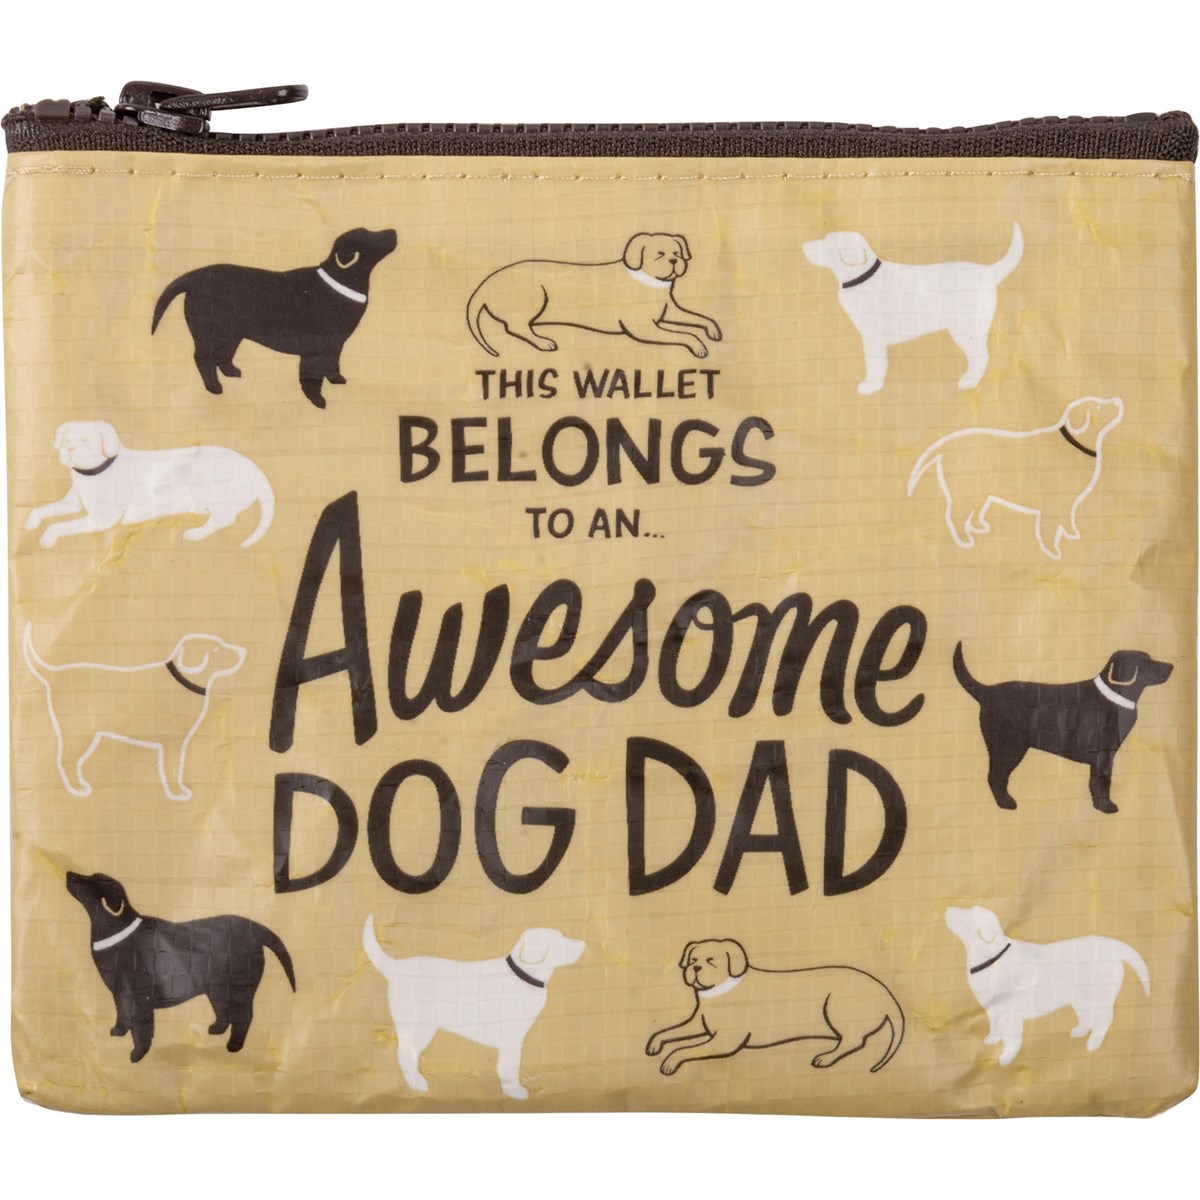 Awesome Dog Dad Zipper Wallet - Post-Consumer Material, Plastic, Metal